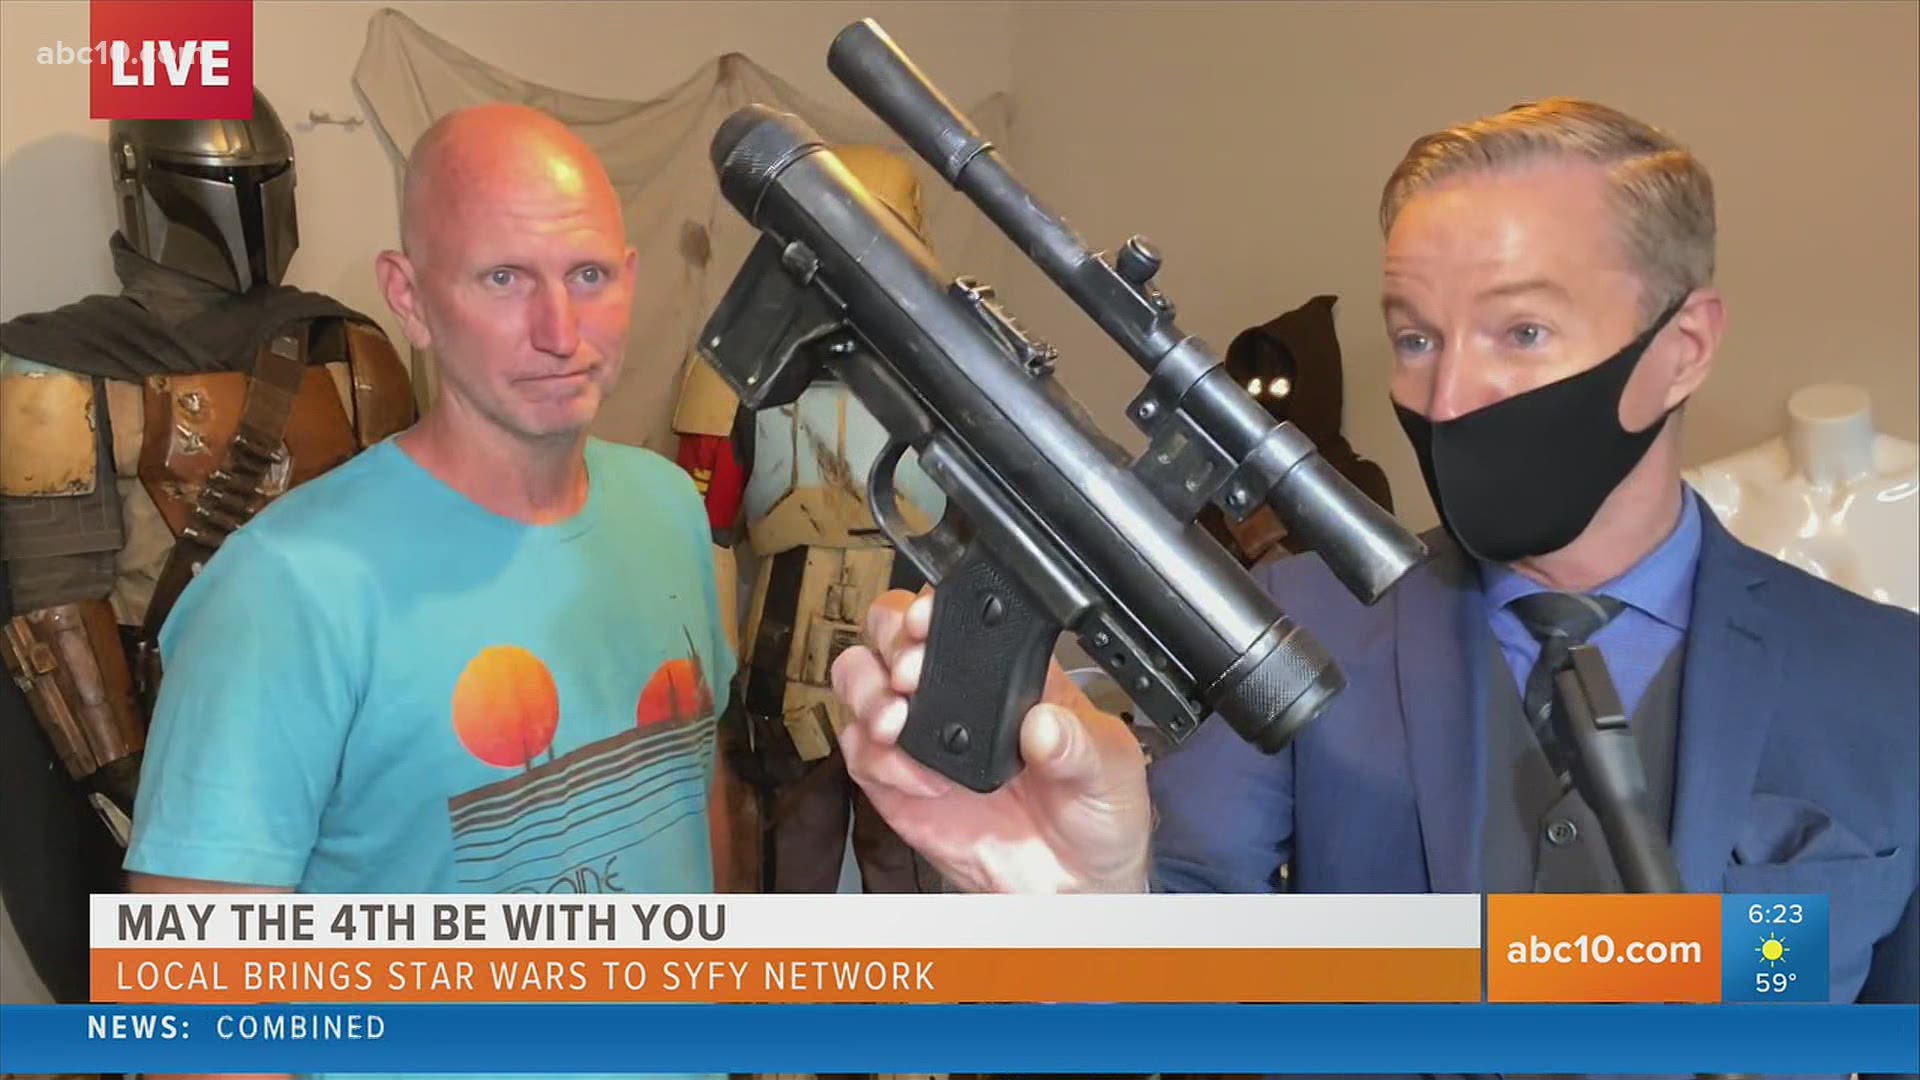 Shawn Cash of "Try to Finish Something" Youtube channel shows ABC10 his film-ready Star Wars creations.